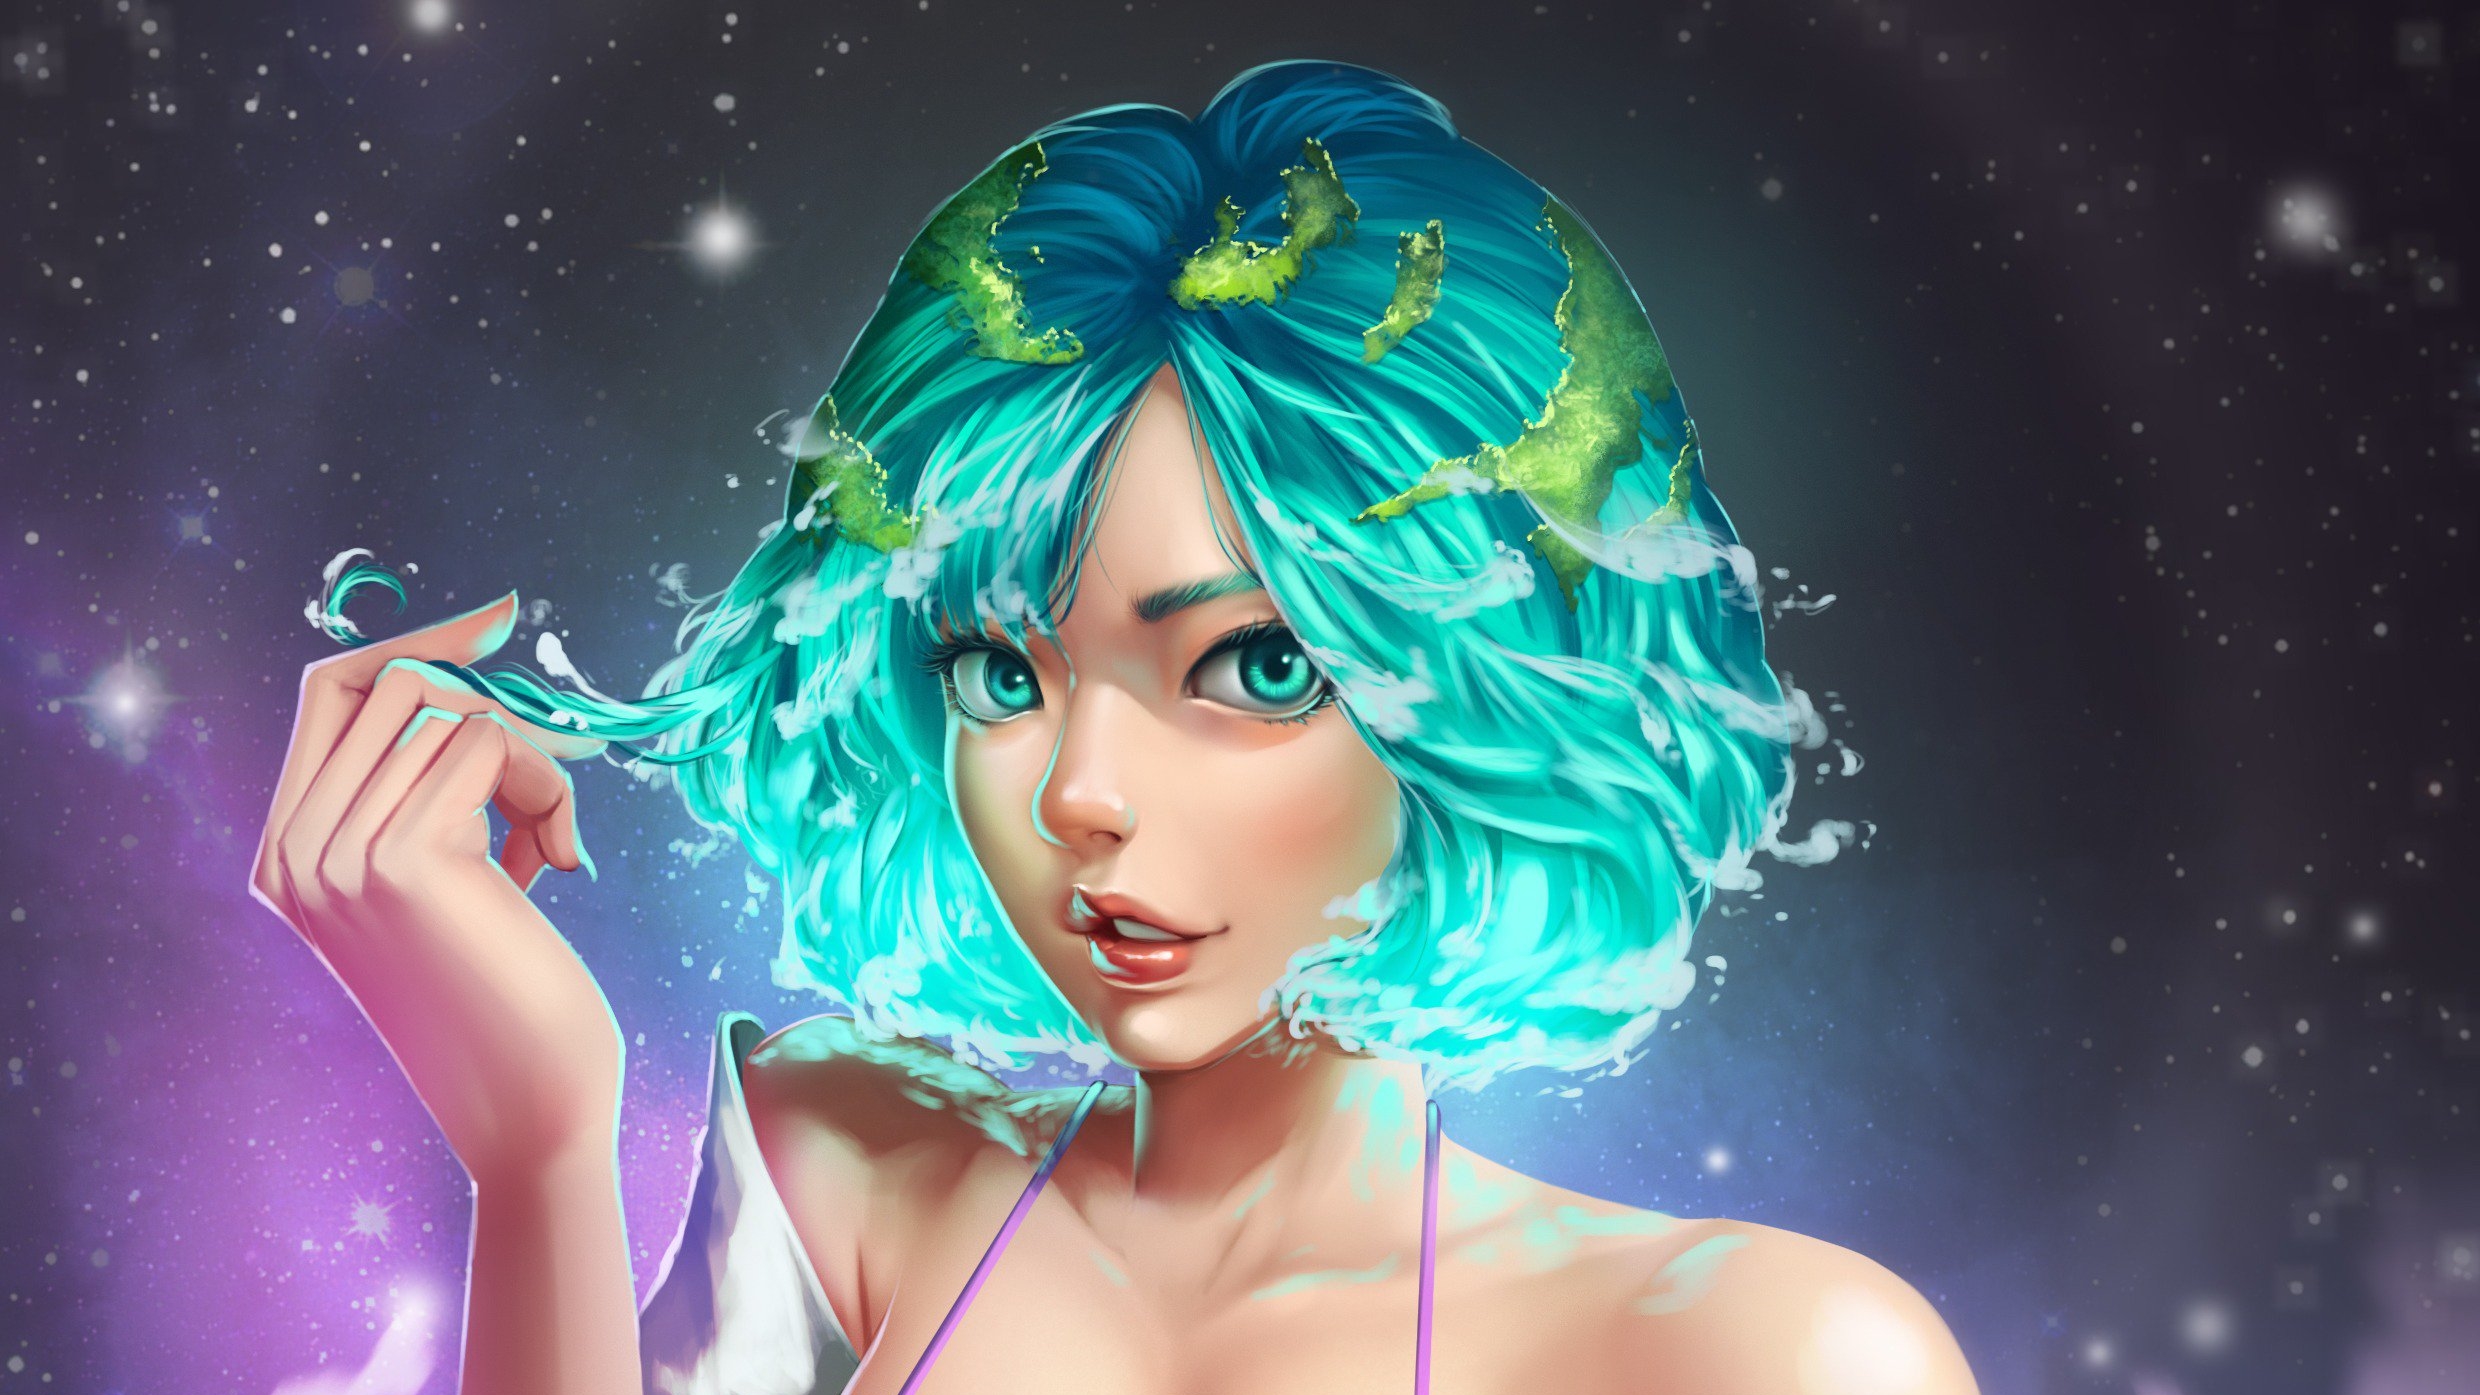 586544 Earth-Chan - Rare Gallery HD Wallpapers